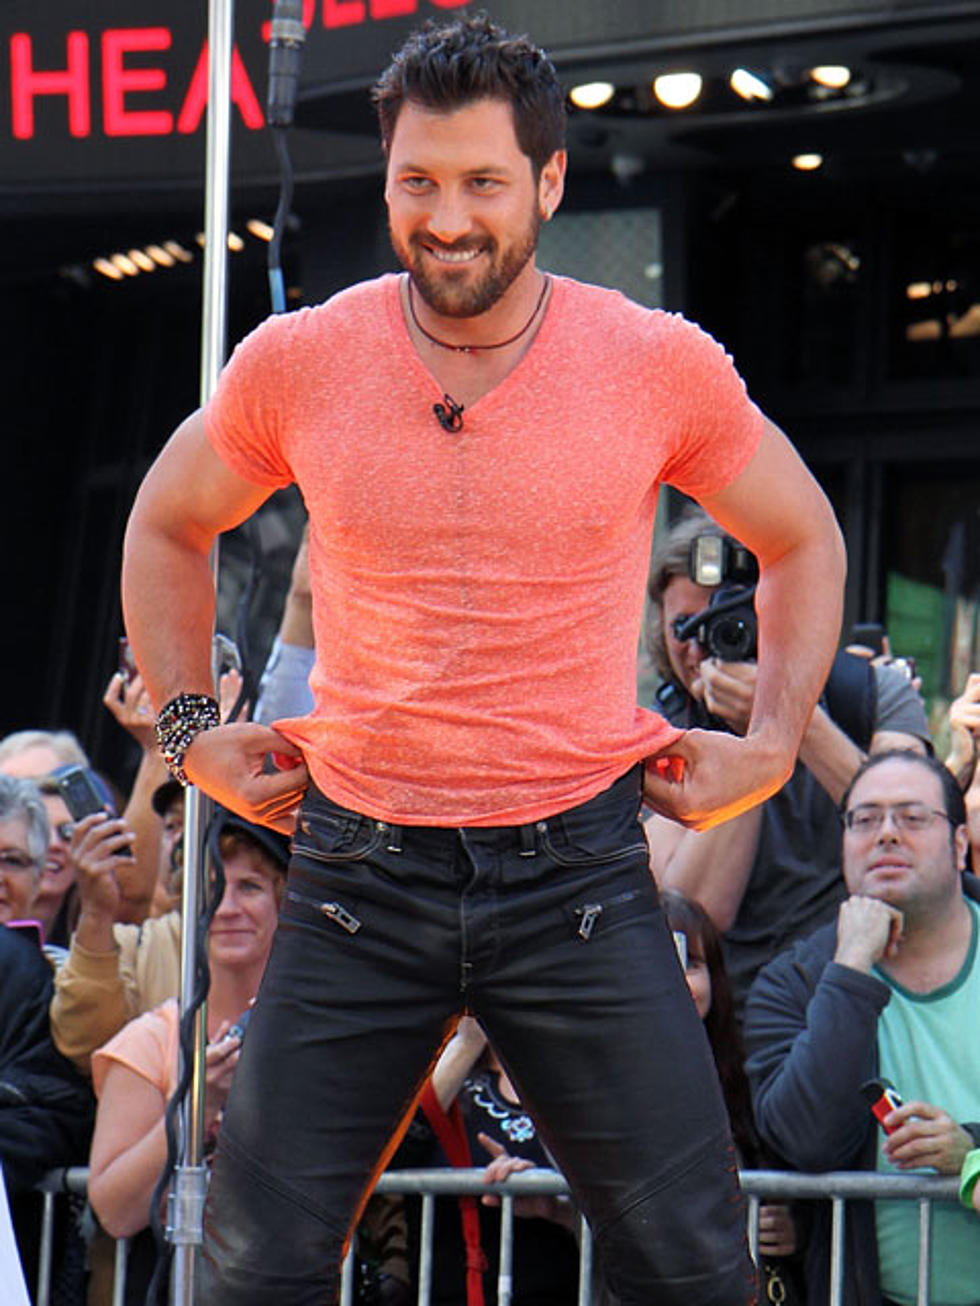 &#8216;Dancing with the Stars&#8217; Maksim Chmerkovskiy &#8211; Hunk of the Day [PICTURES]